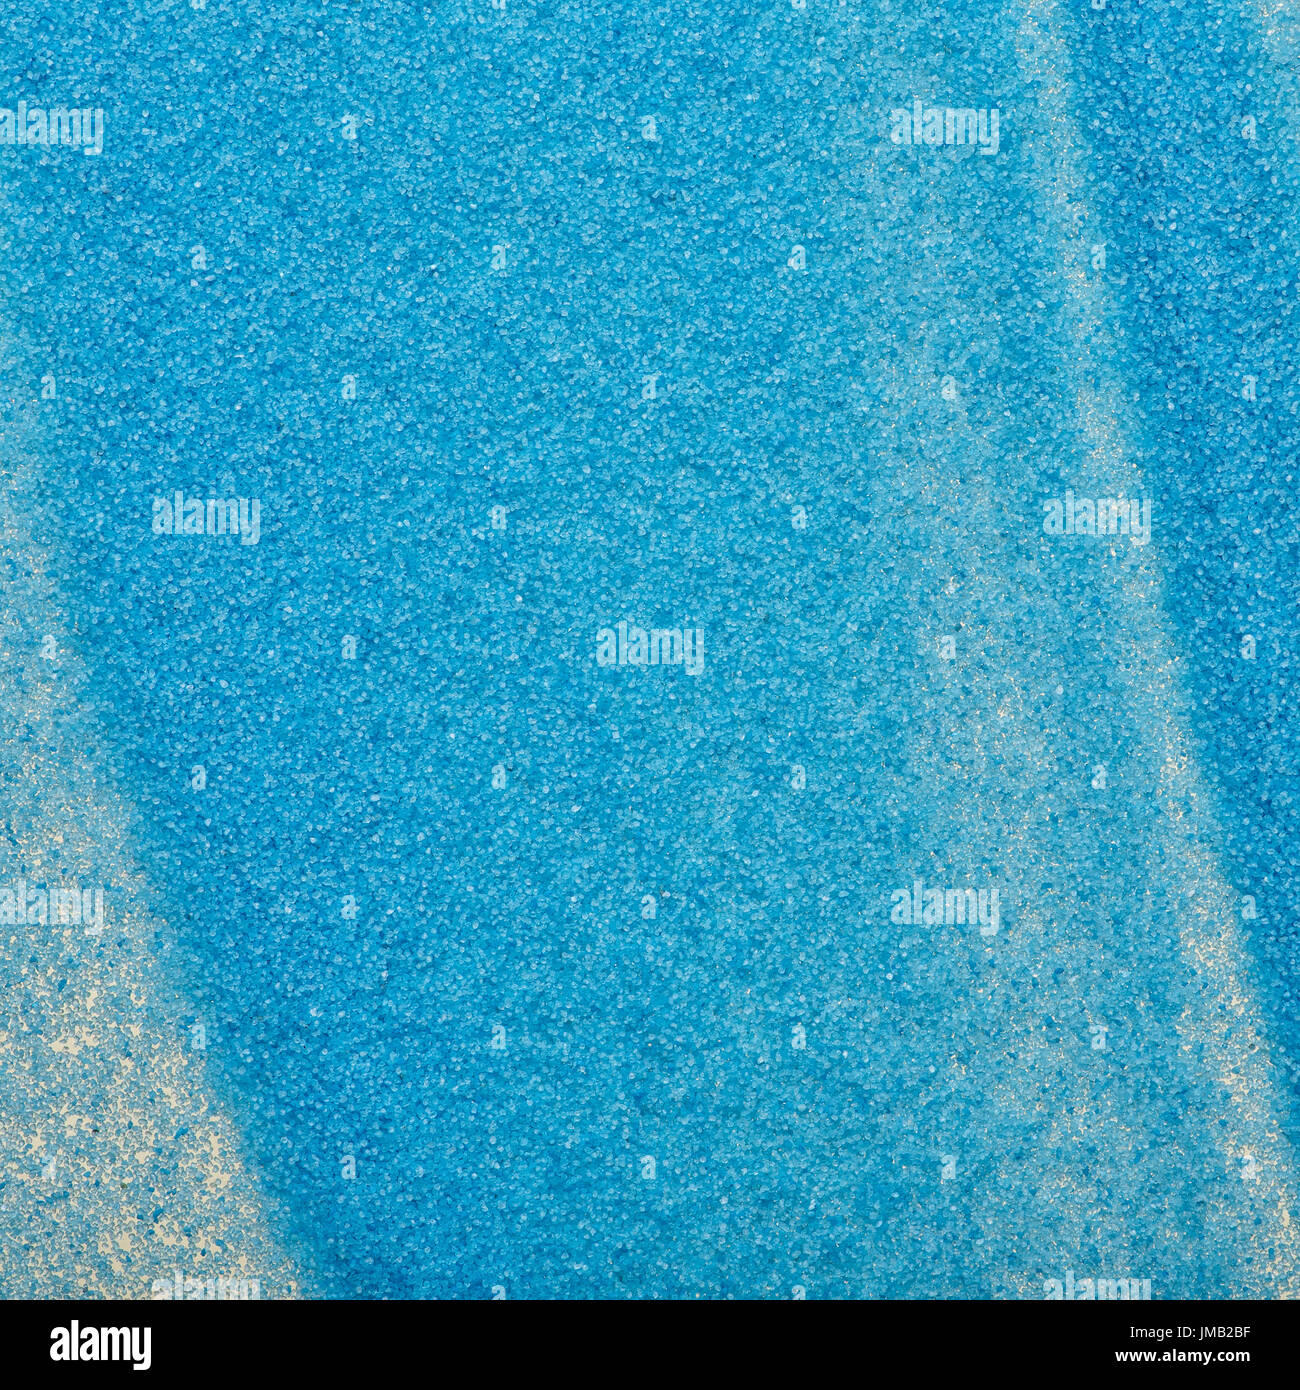 Macro shot of a blue sand texture. Particles of blue sand from a short distance. Stock Photo